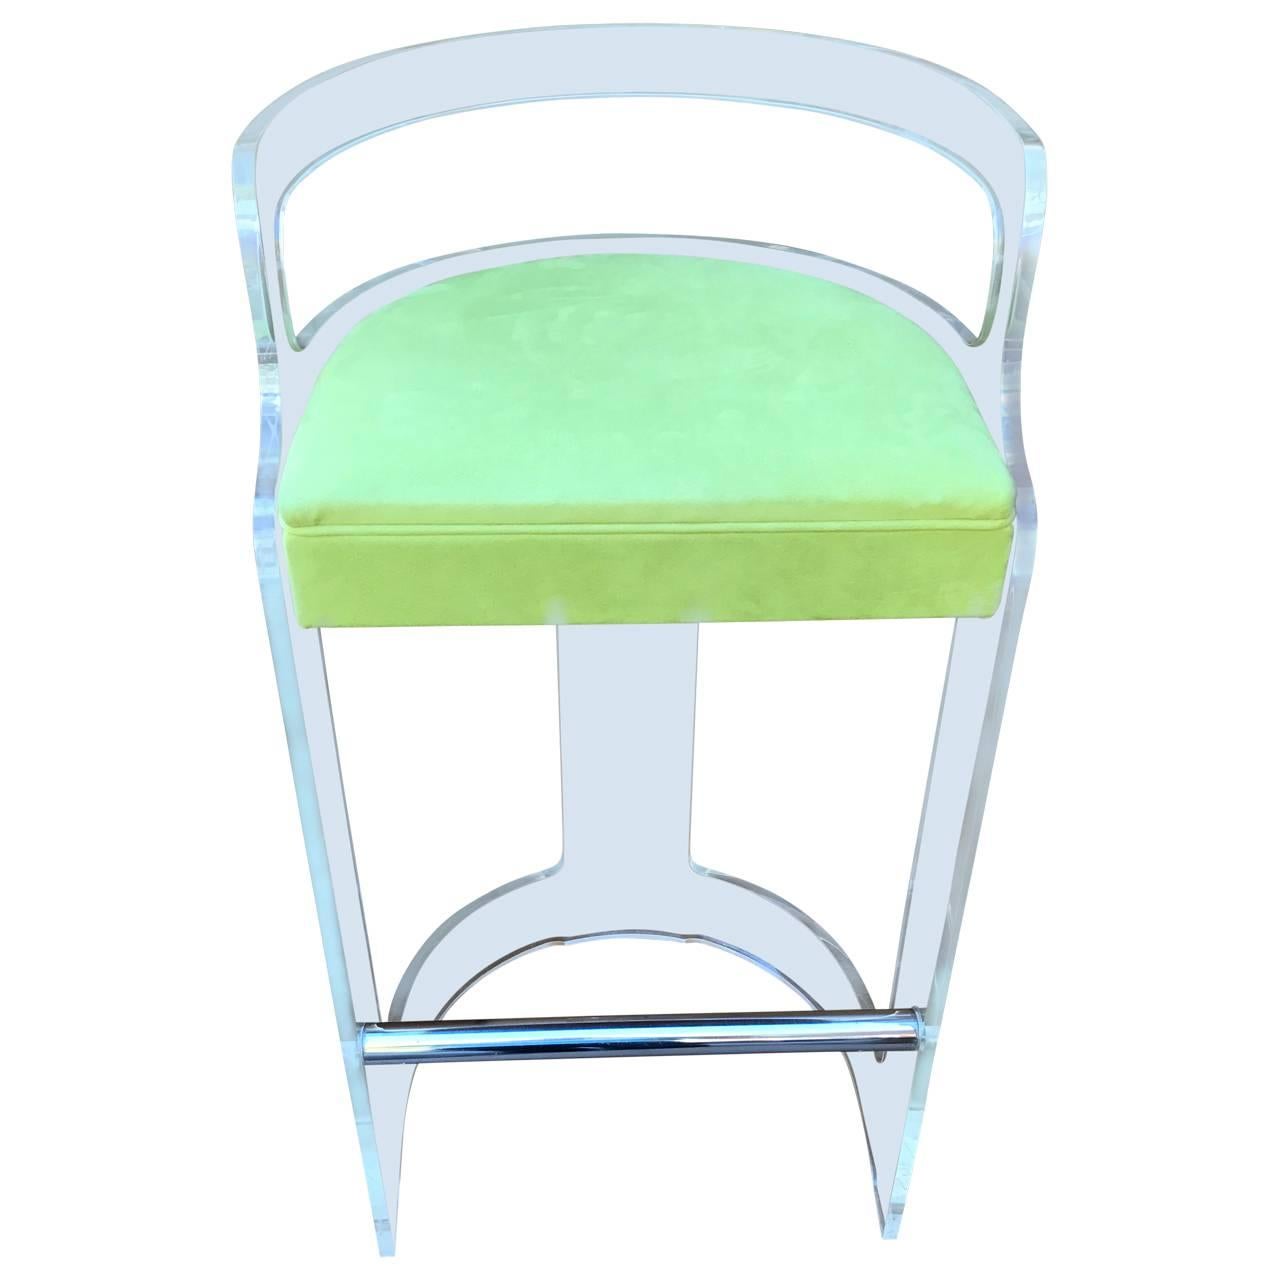 Key lime upholstered Lucite bar chair with chrome foot rest, manufactured by Hill MFG for Hollis Jones.